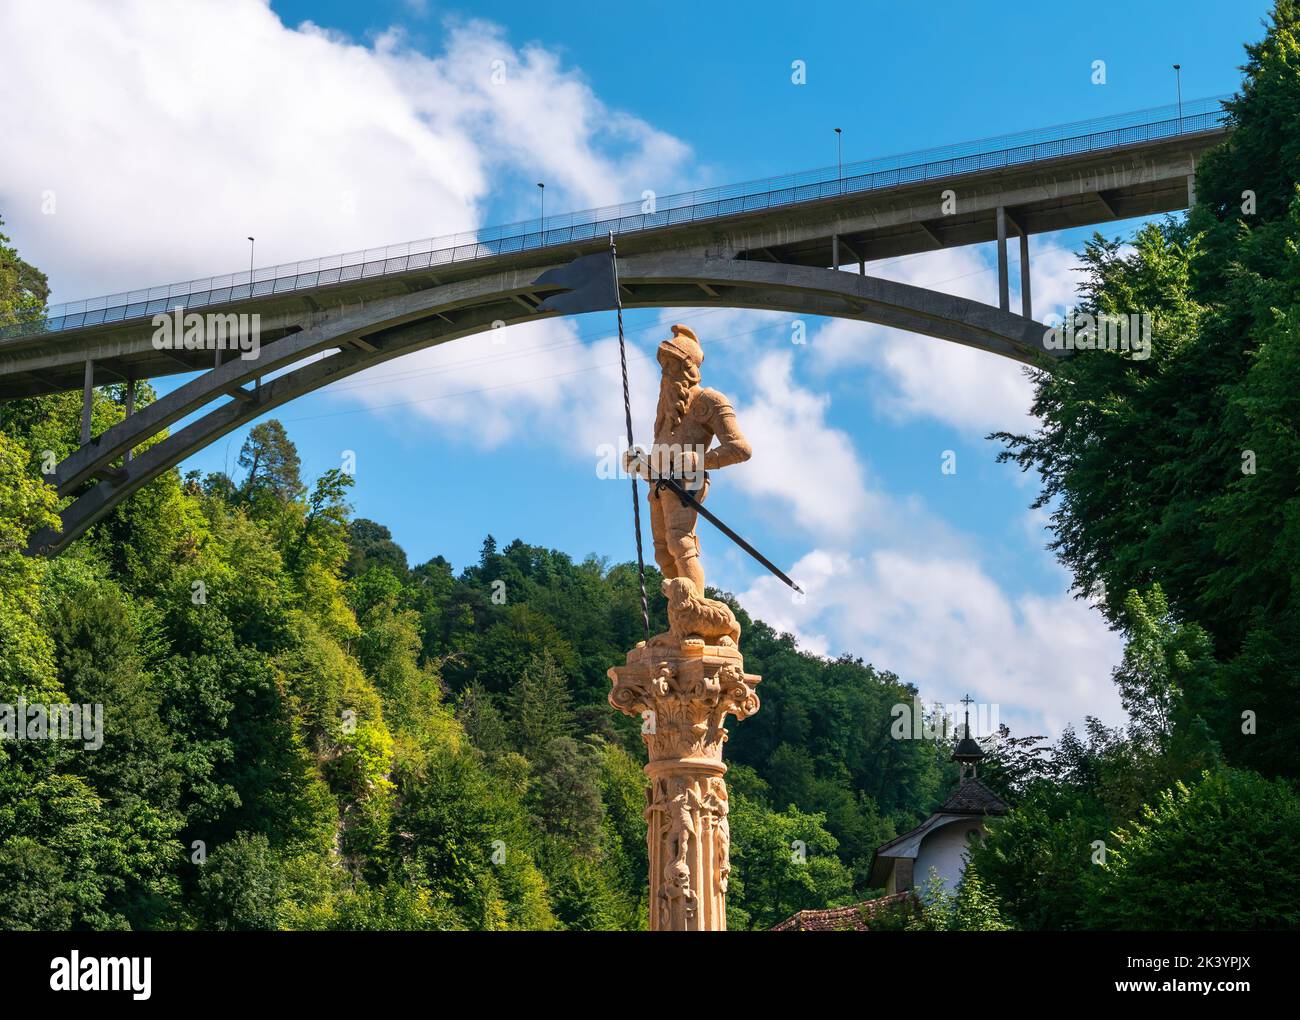 Fribourg, Switzerland - August 31, 2022: A modern highway viaduct over a historic knight statue in the old town of Fribourg, Switzerland Stock Photo